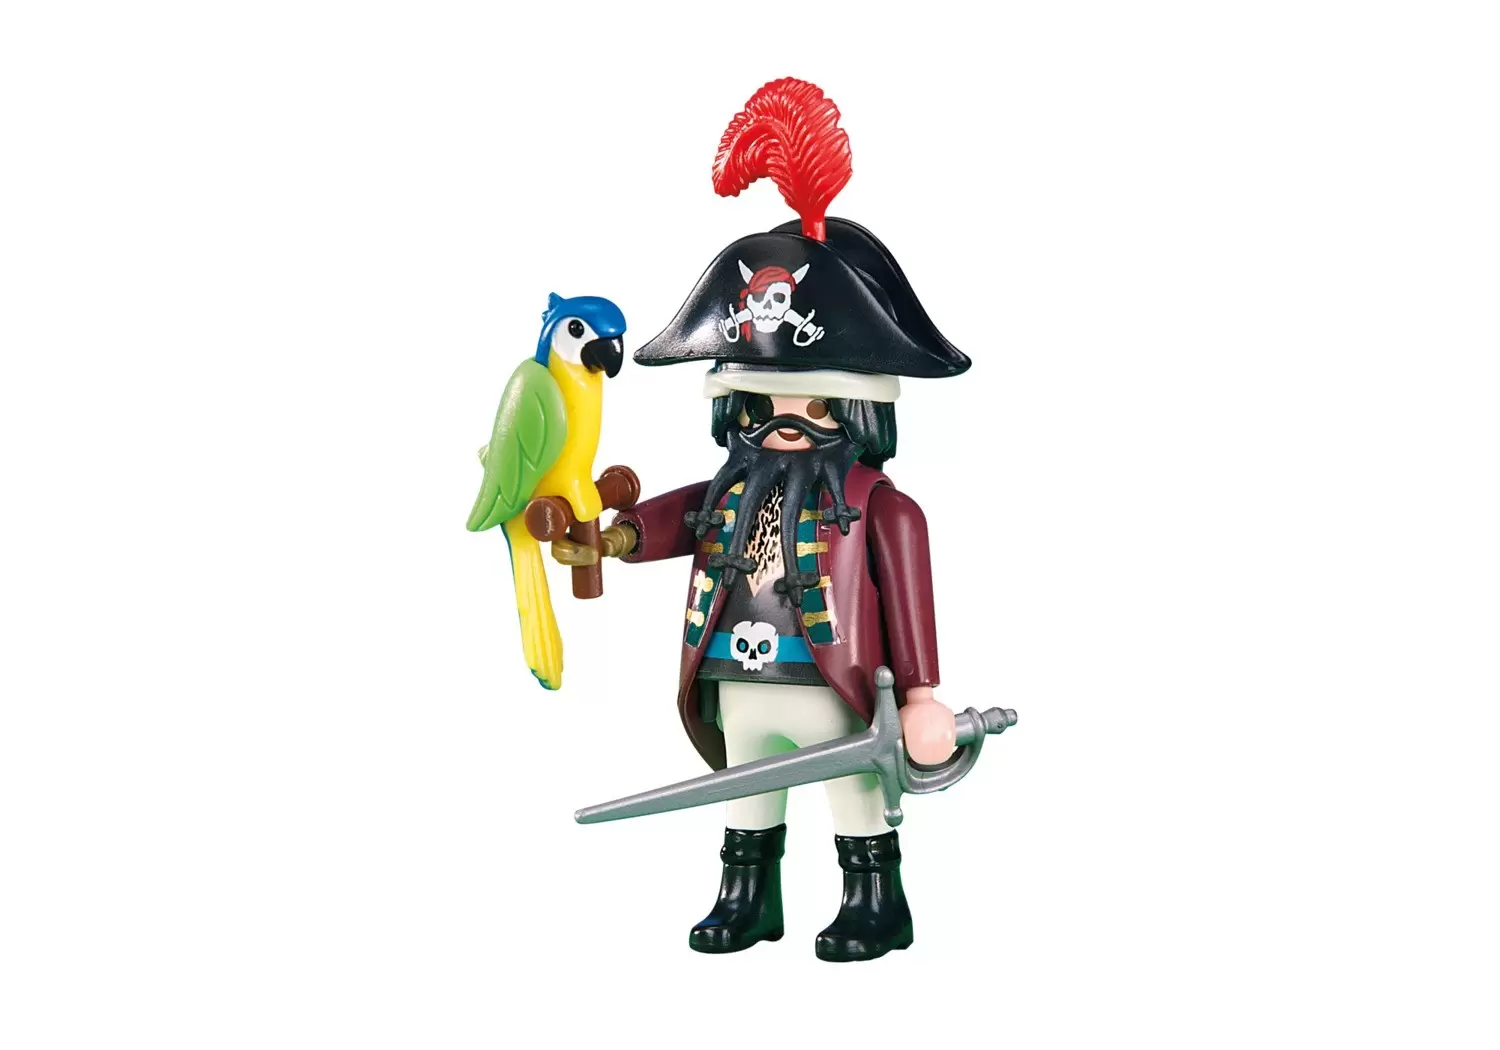 Pirate Playmobil - Pirate captain with parrot